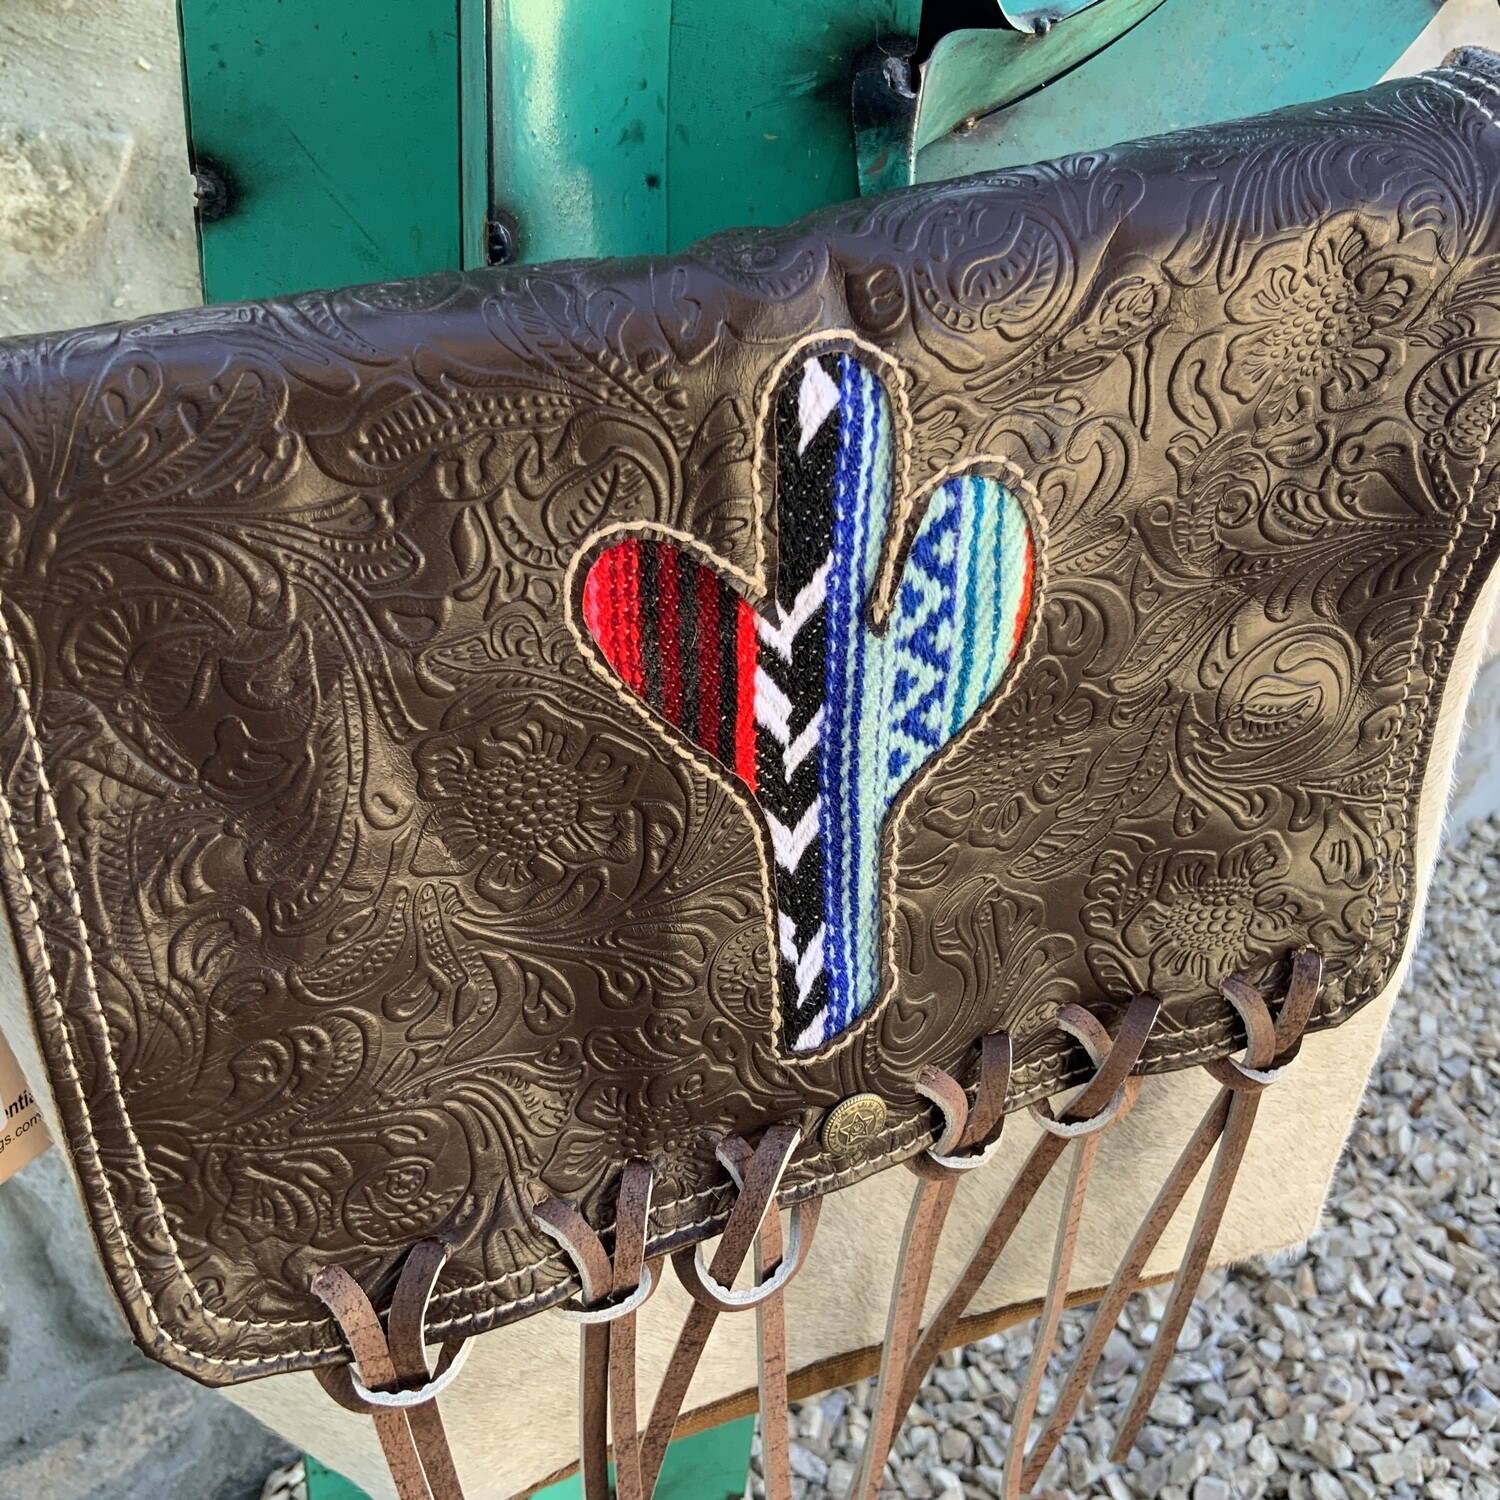 Leather and Hide Serape Cactus Bag with Fringe - Regular